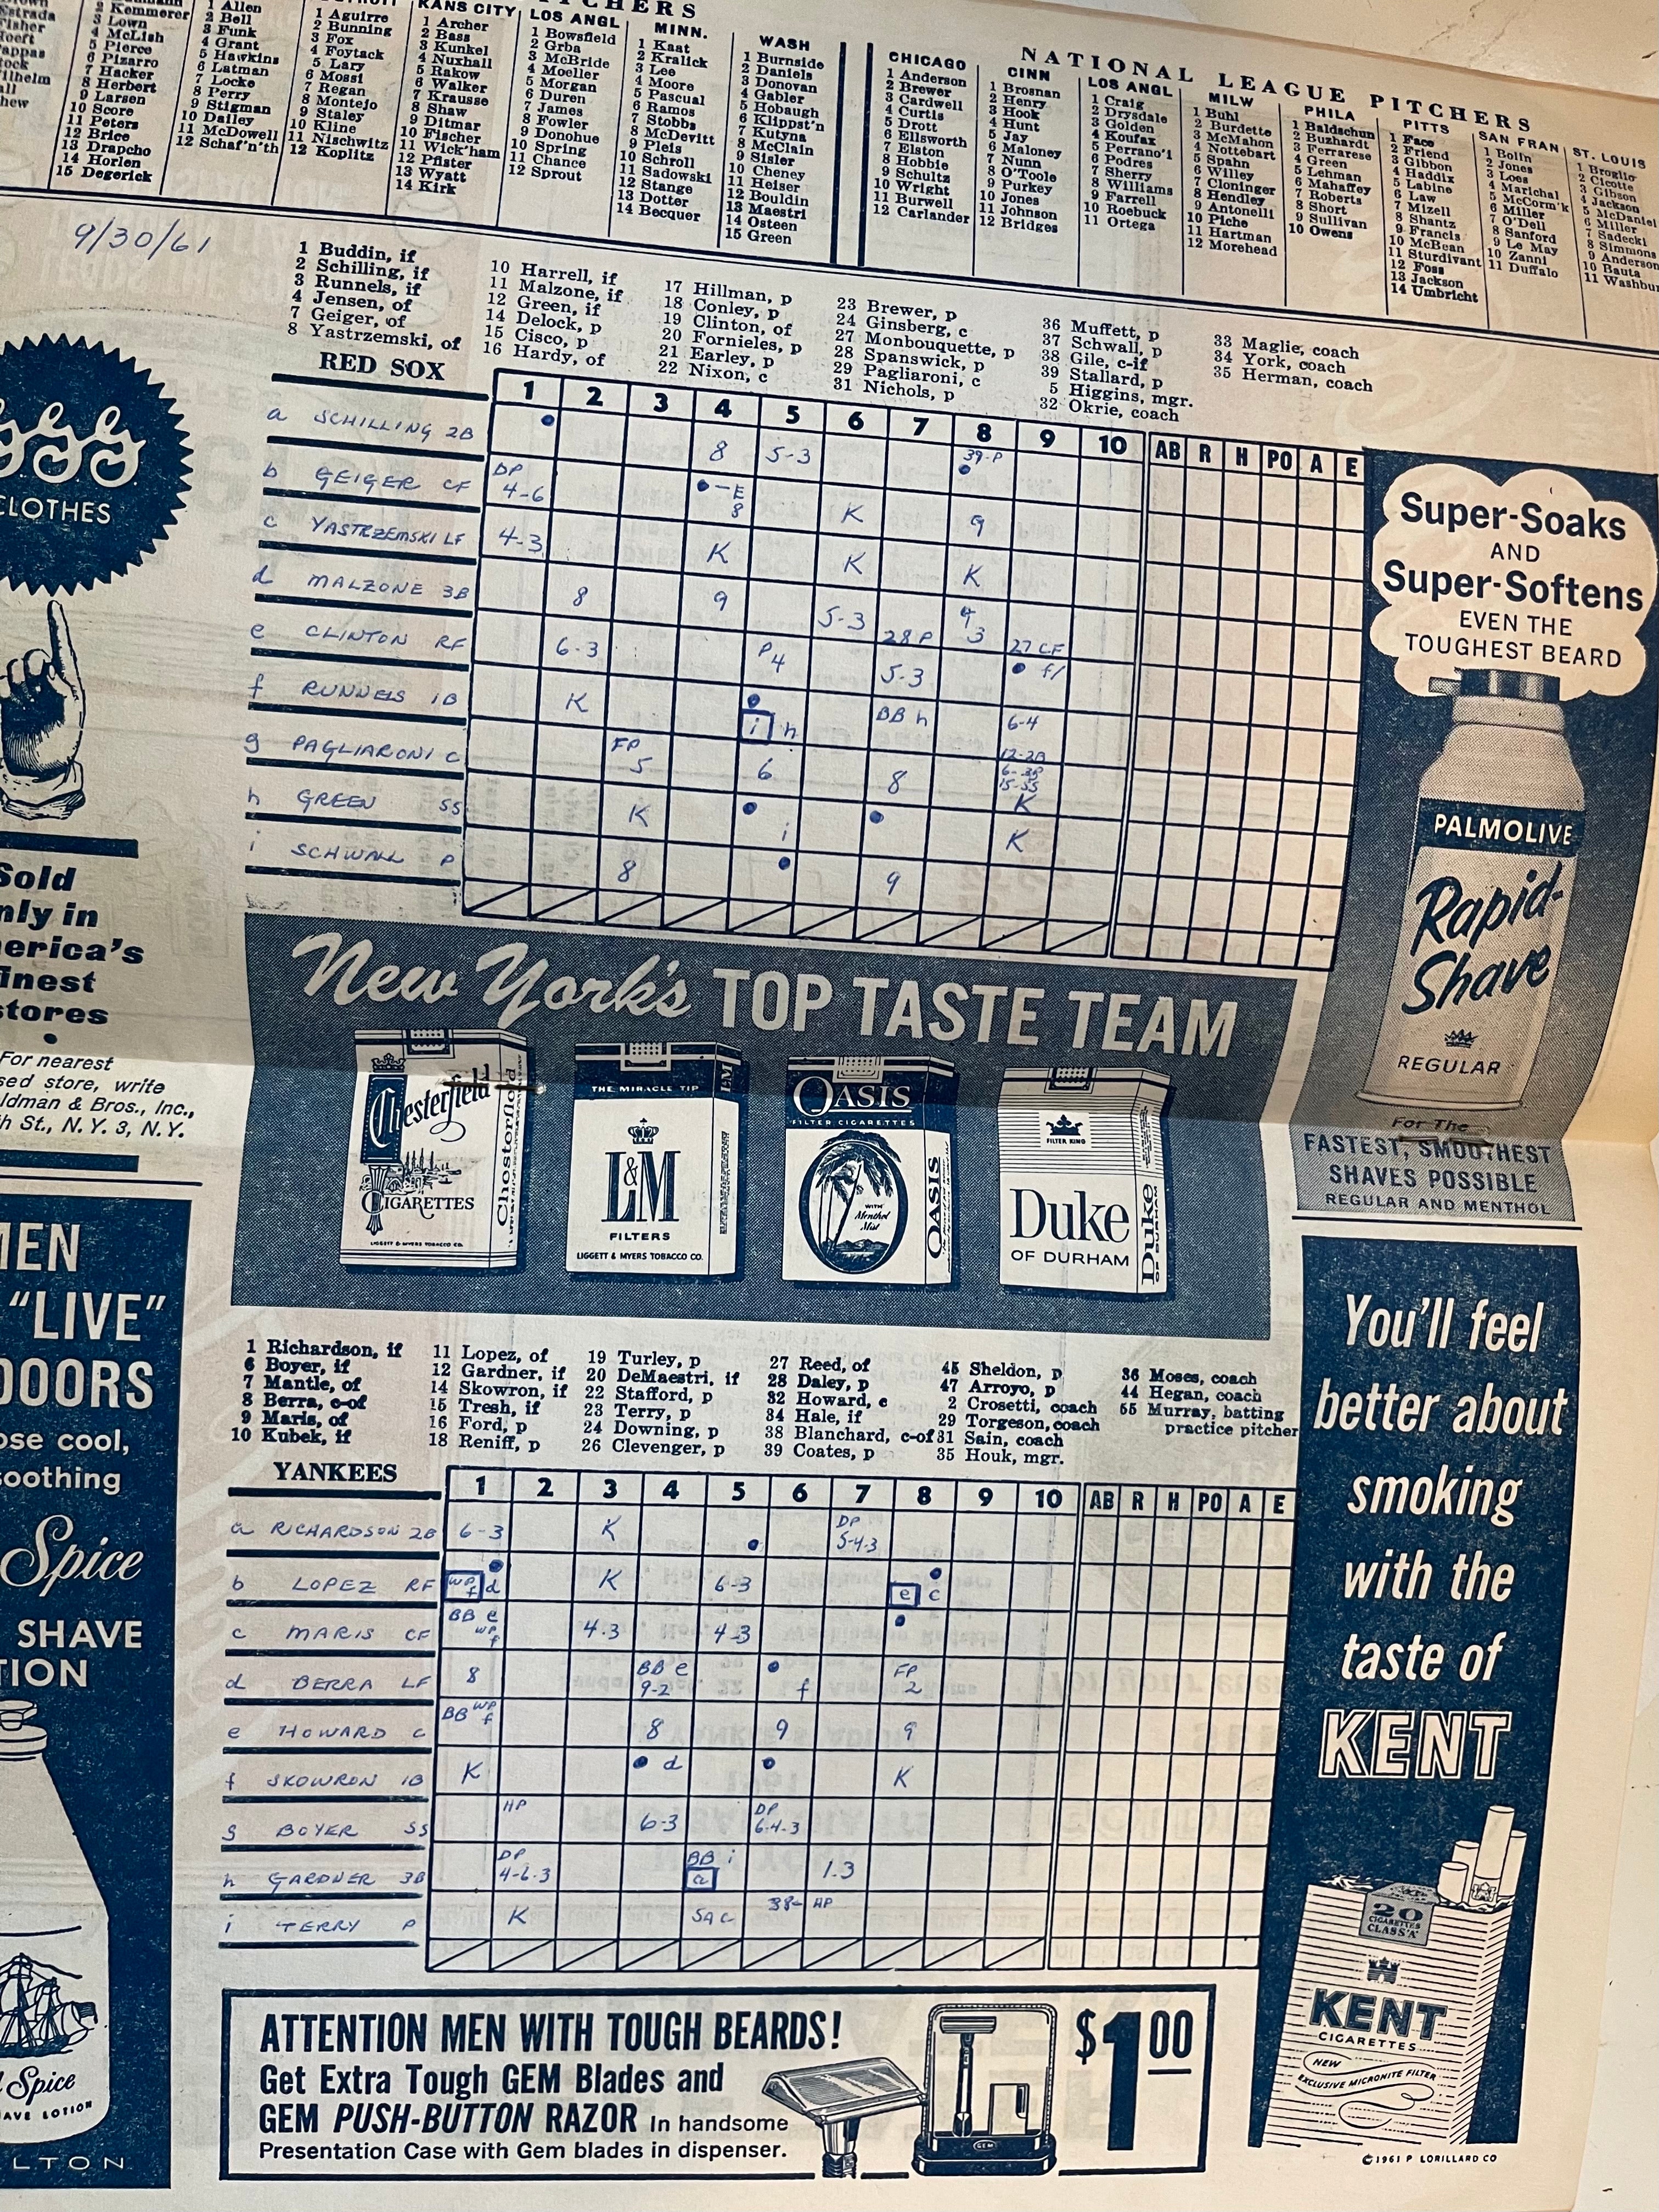 1961 Yankees original baseball program and score card autograph by Dizzy Dean with COA